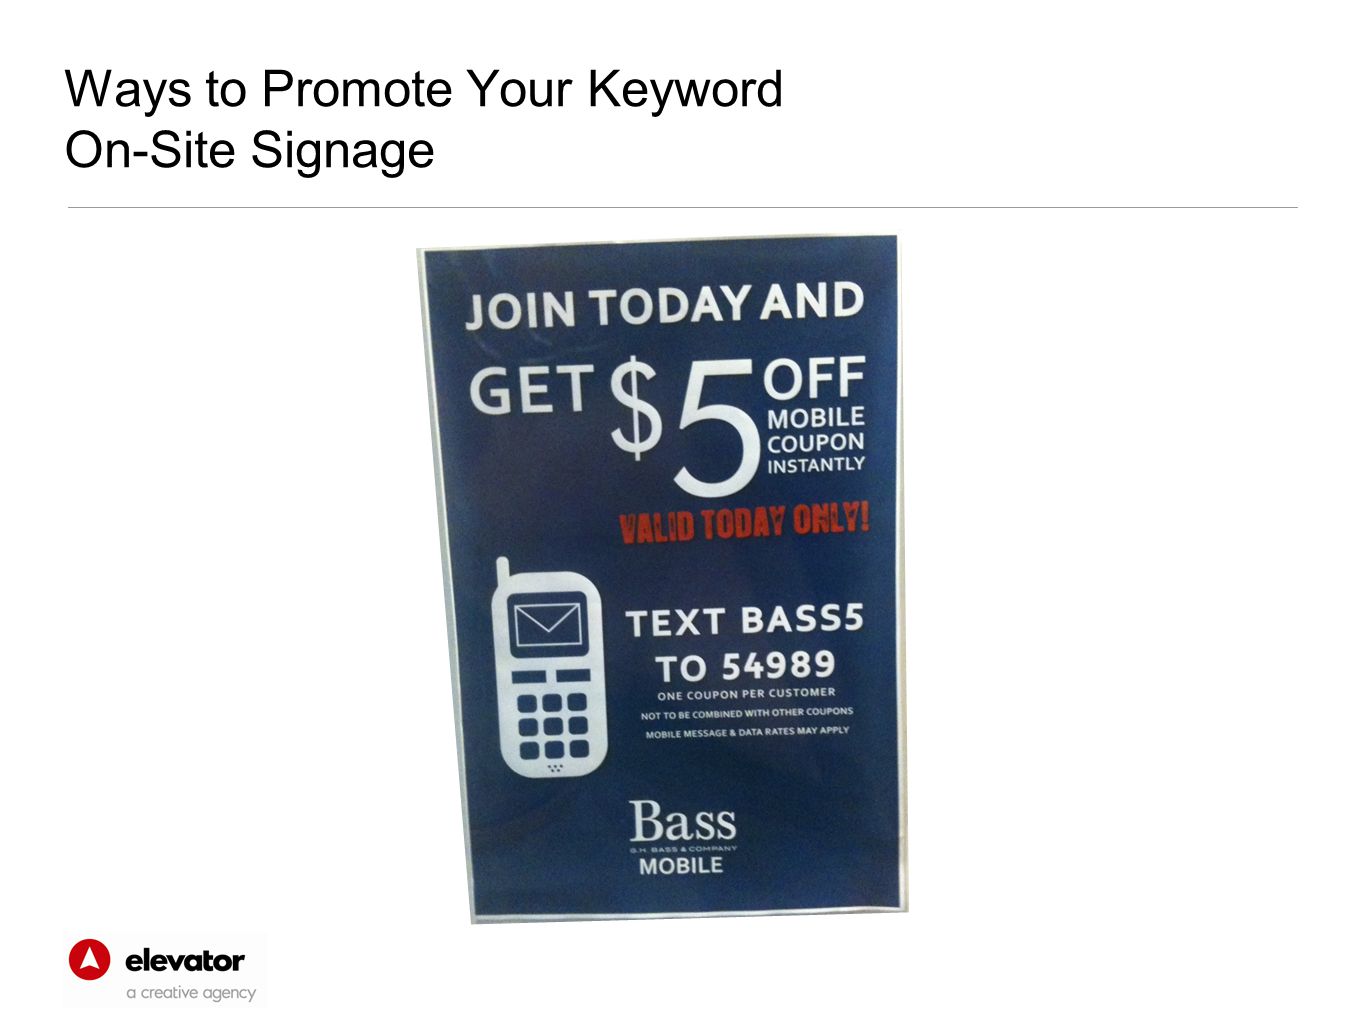 Ways to Promote Your Keyword On-Site Signage